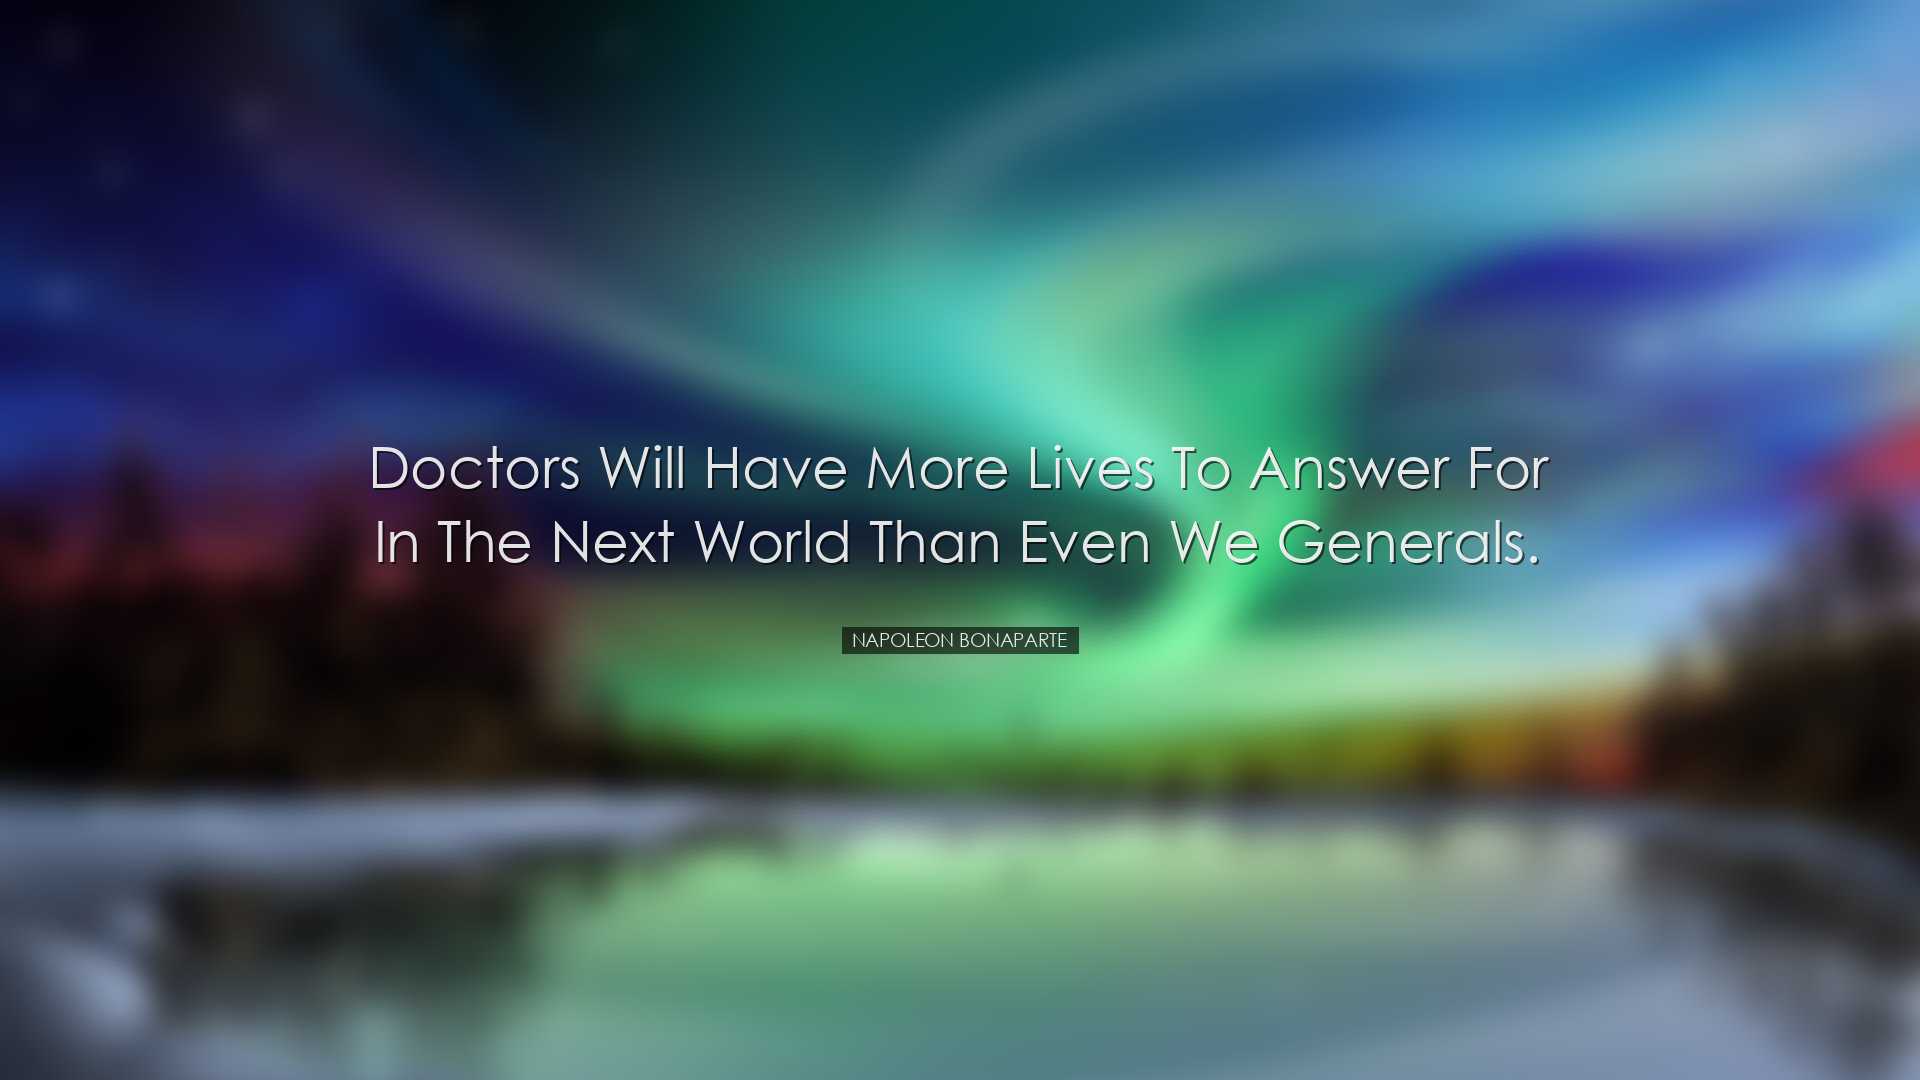 Doctors will have more lives to answer for in the next world than